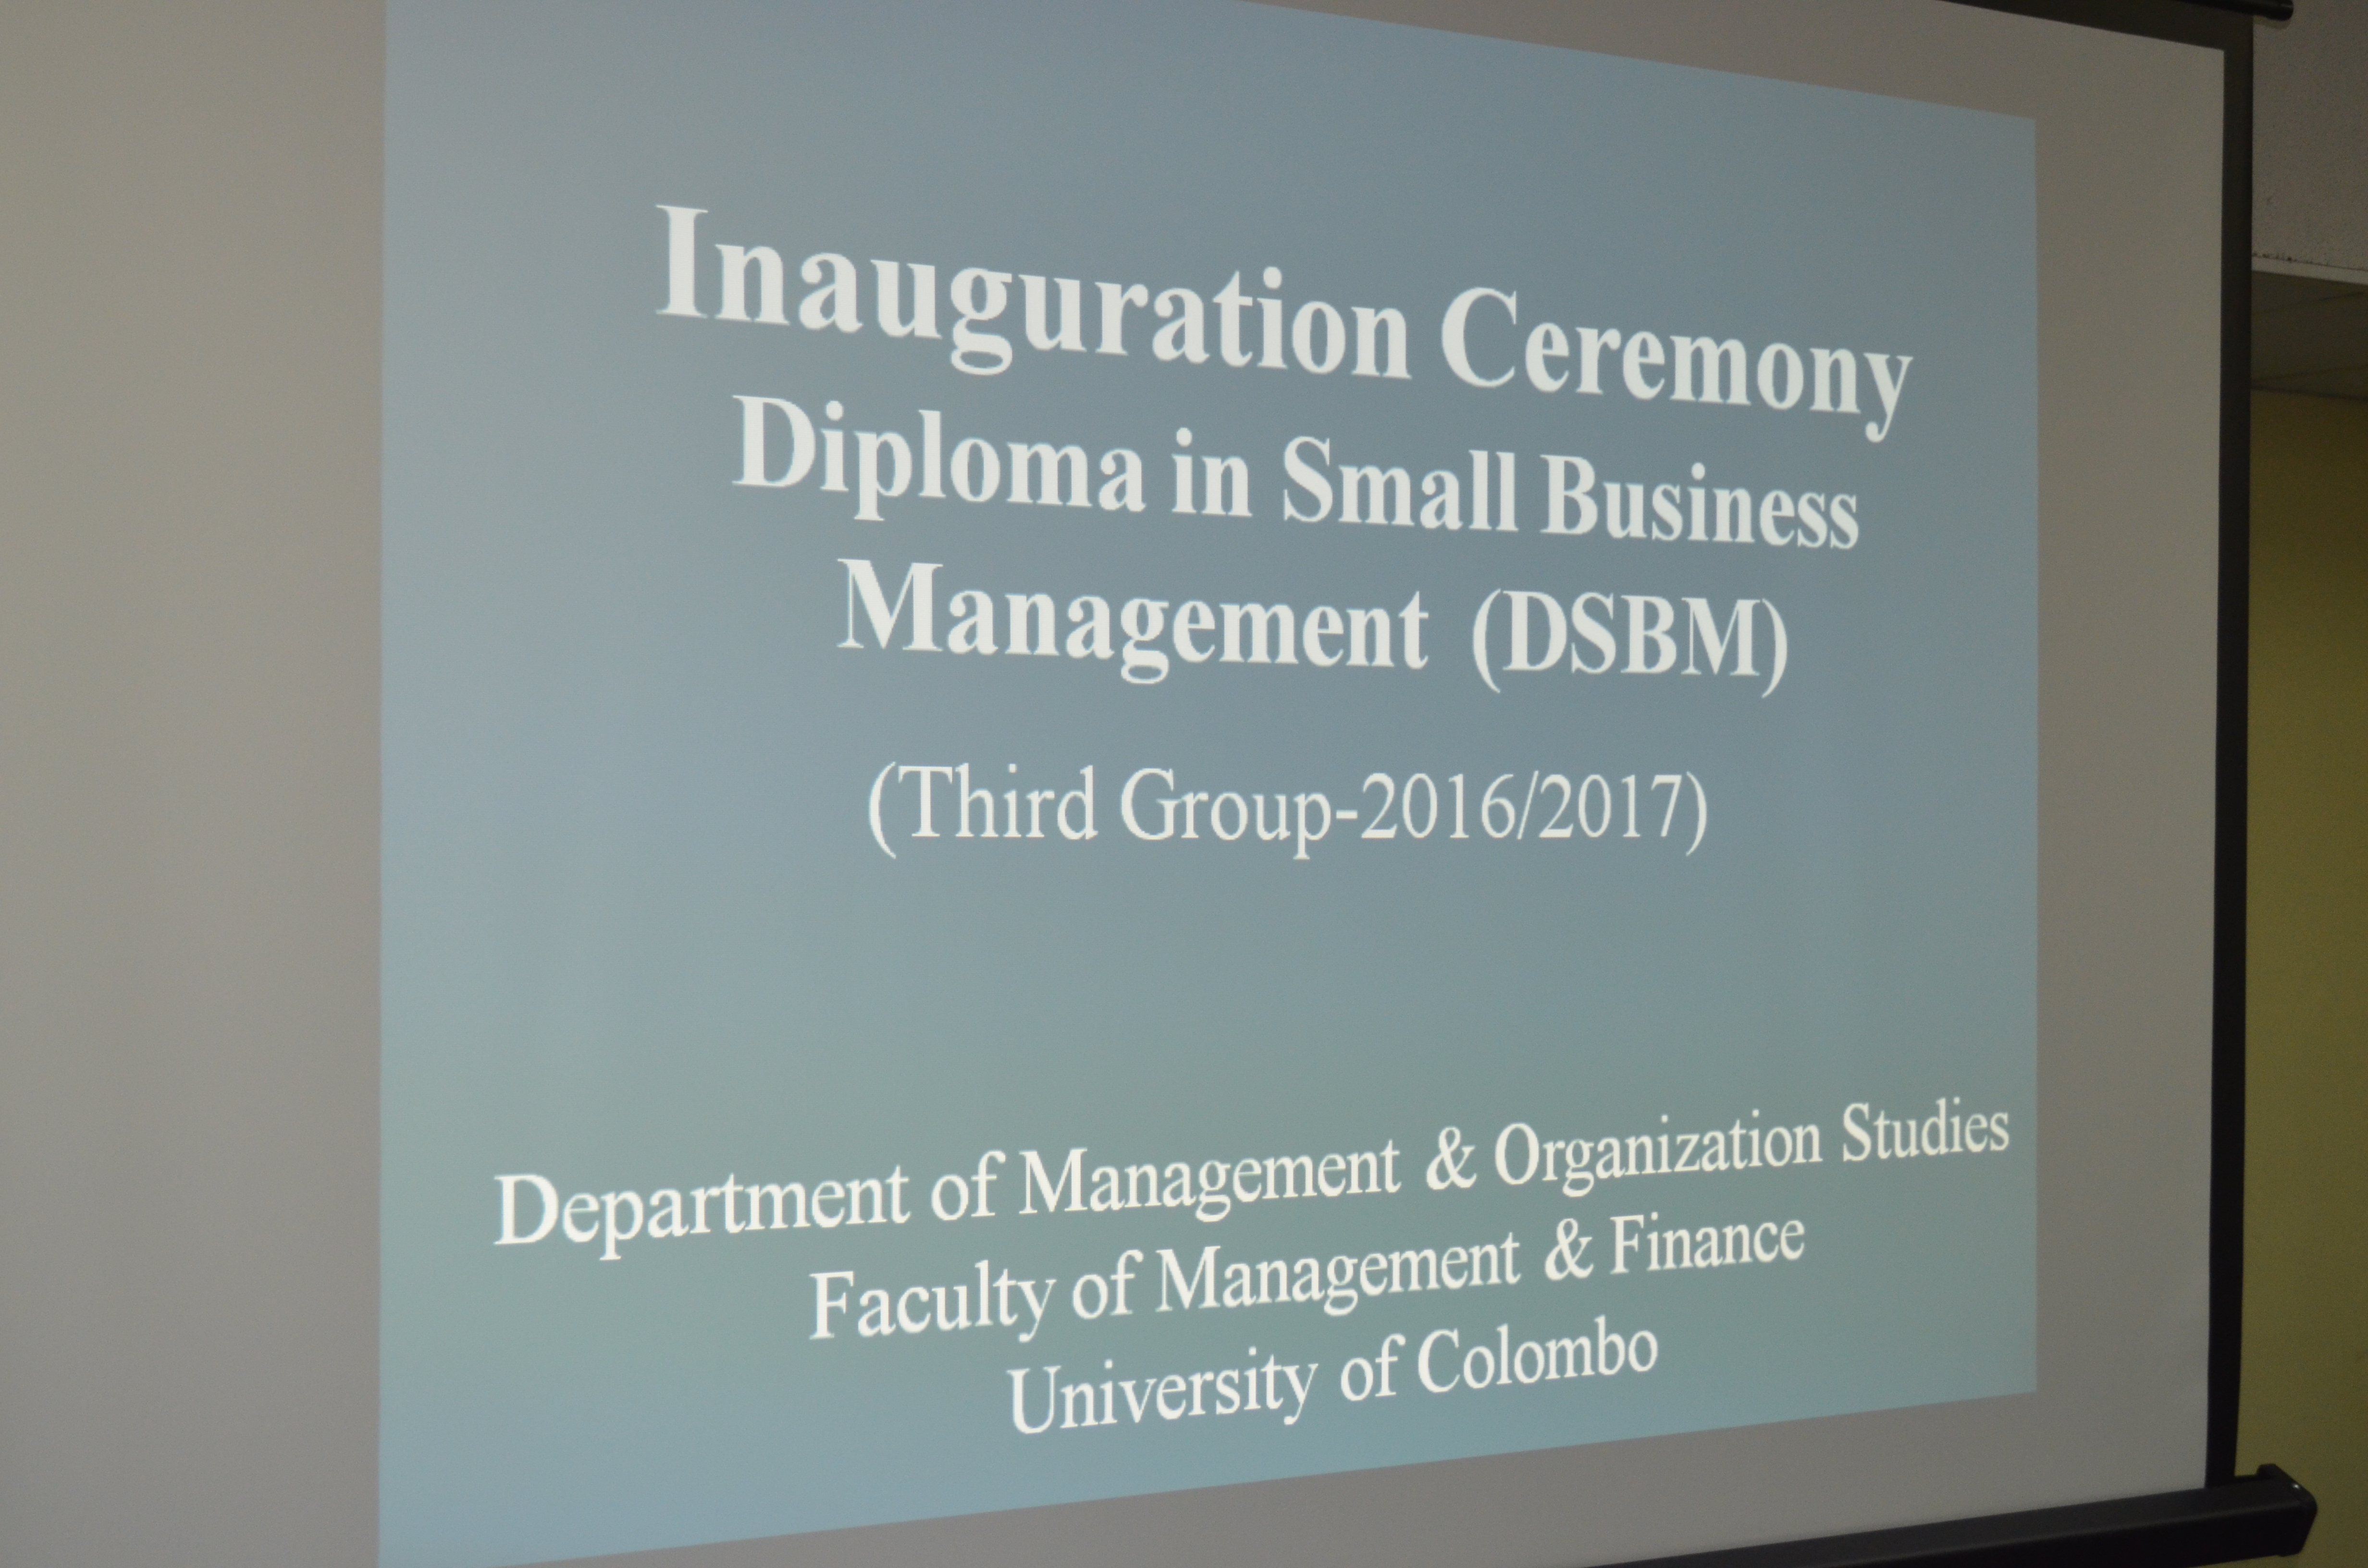 Inaugural Ceremony of Diploma in Small Business Management (DSBM)